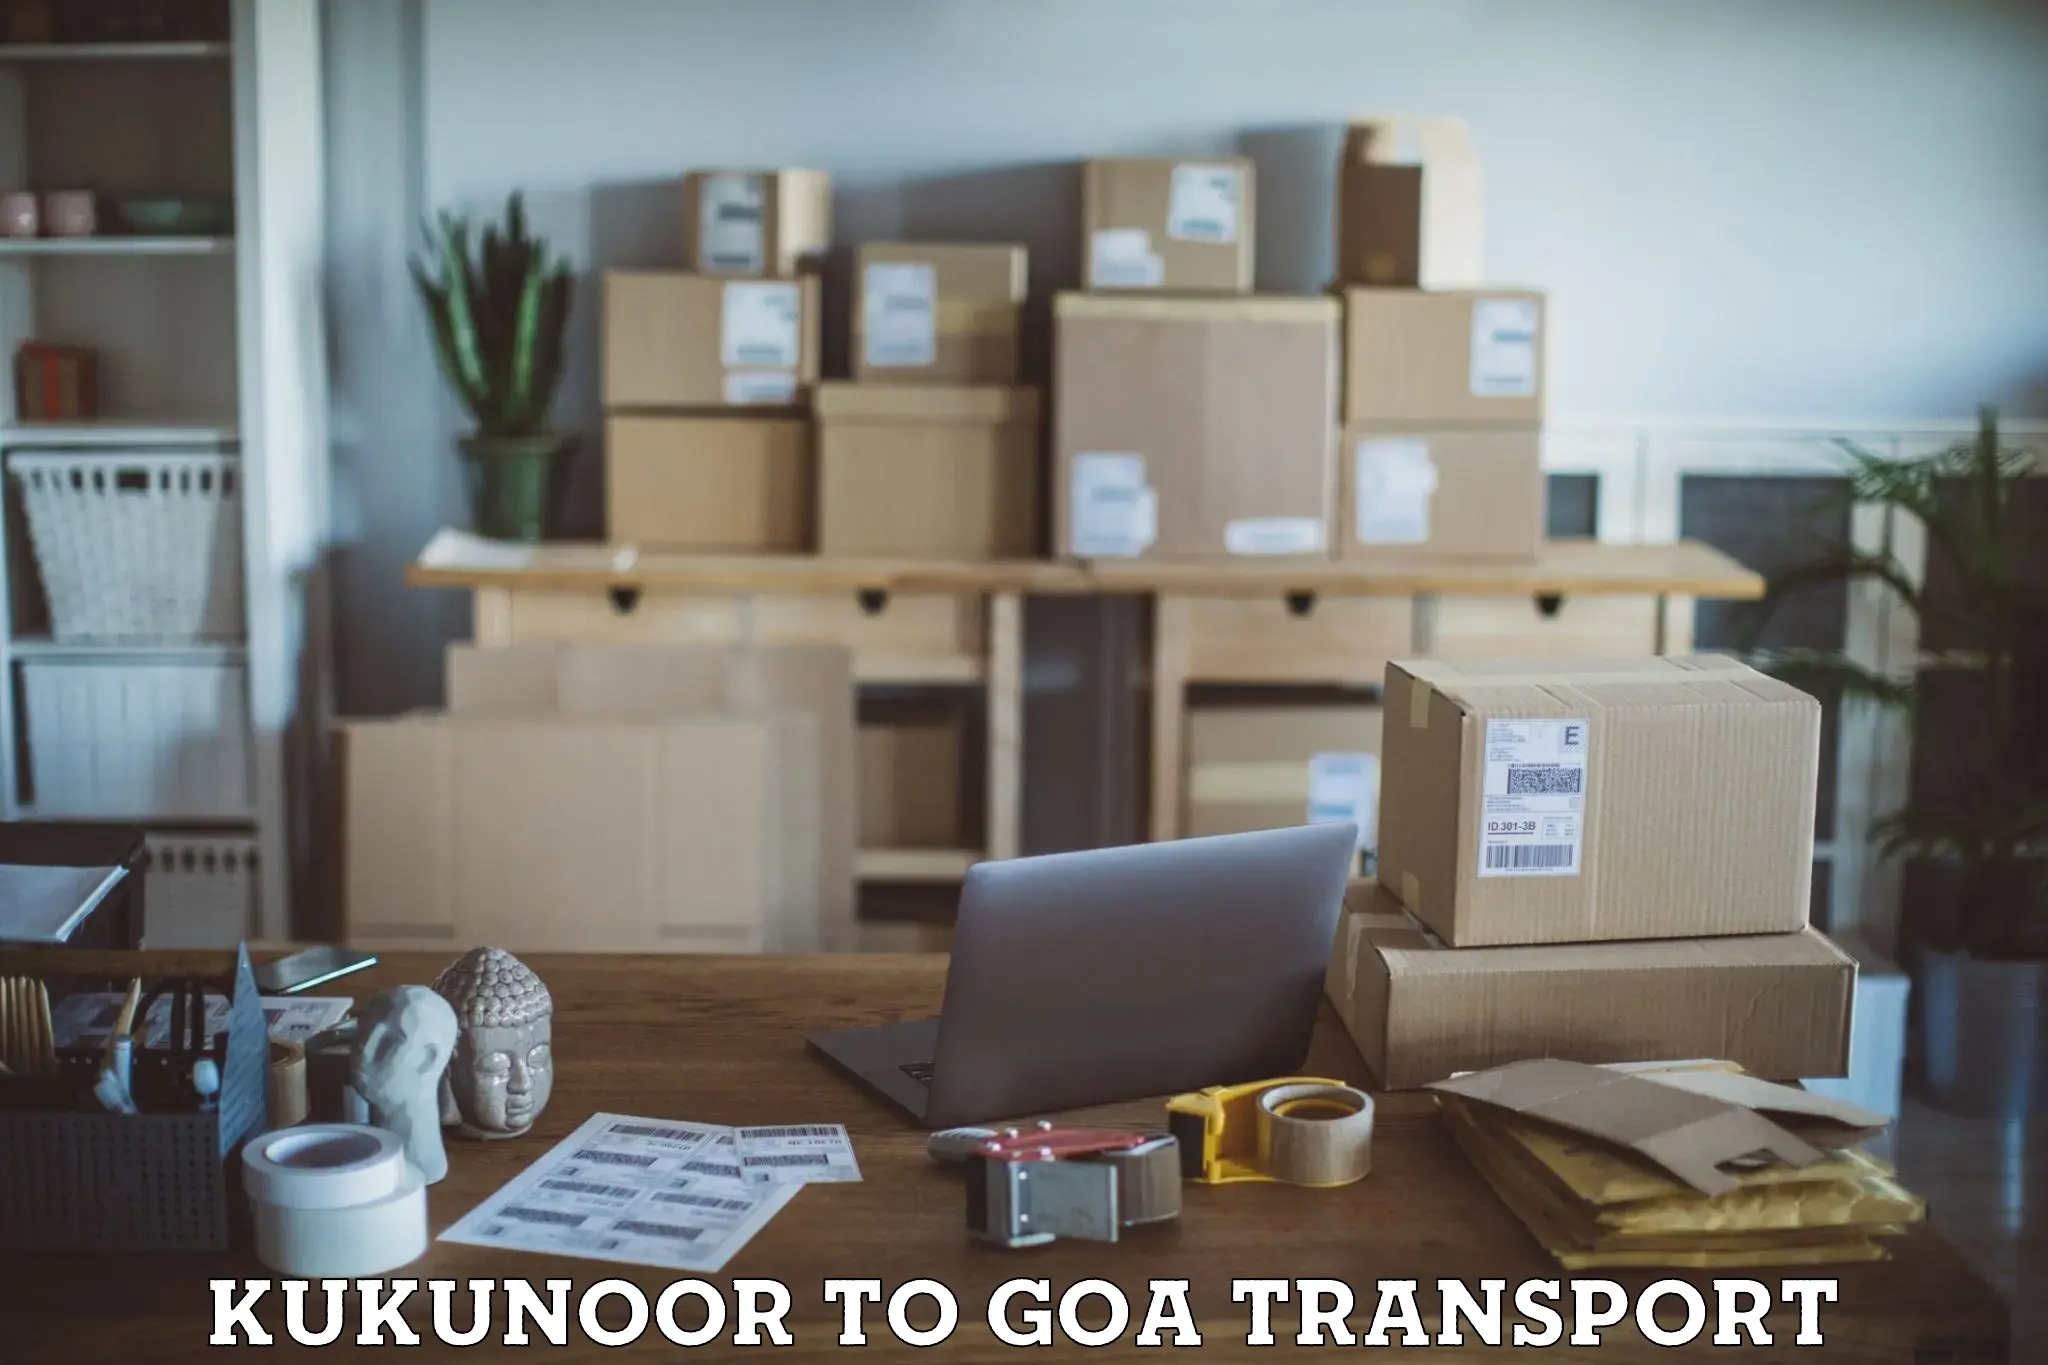 Scooty transport charges Kukunoor to Goa